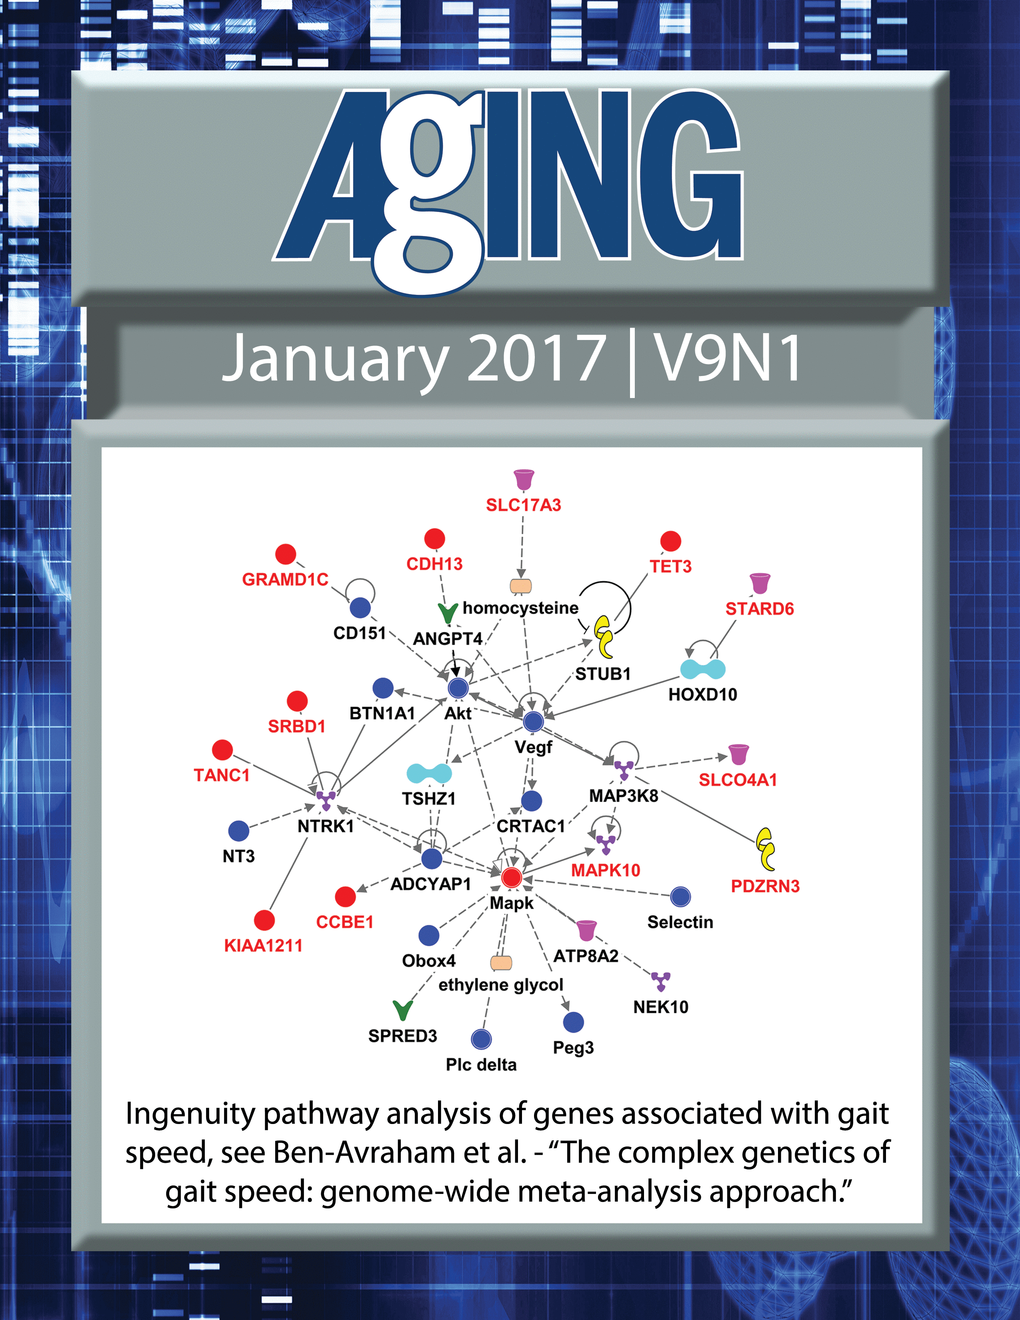 The cover for issue 1 of Aging features Figure 3B, ''The complex genetics of gait speed: genome-wide meta-analysis approach" from Ben-Avraham et al.